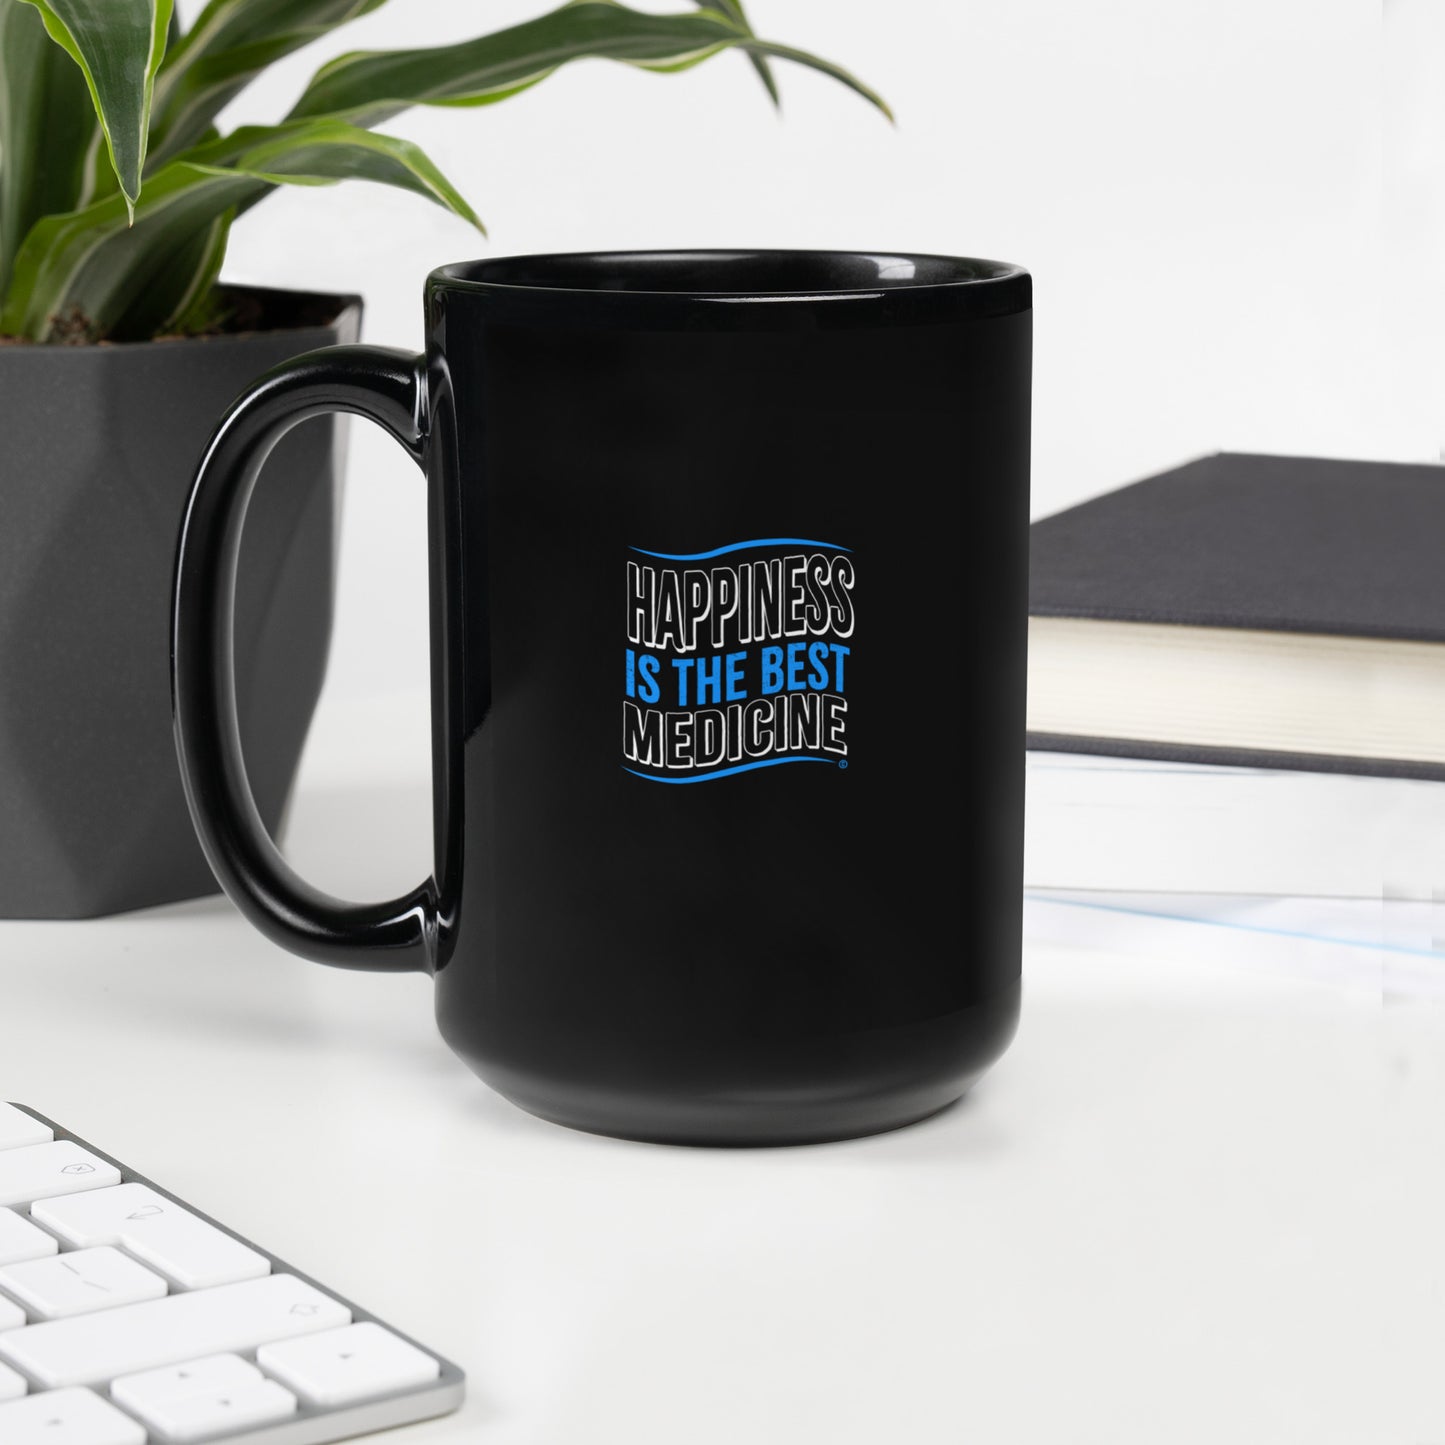 Happiness is the Best Medicine Black Glossy Mugs